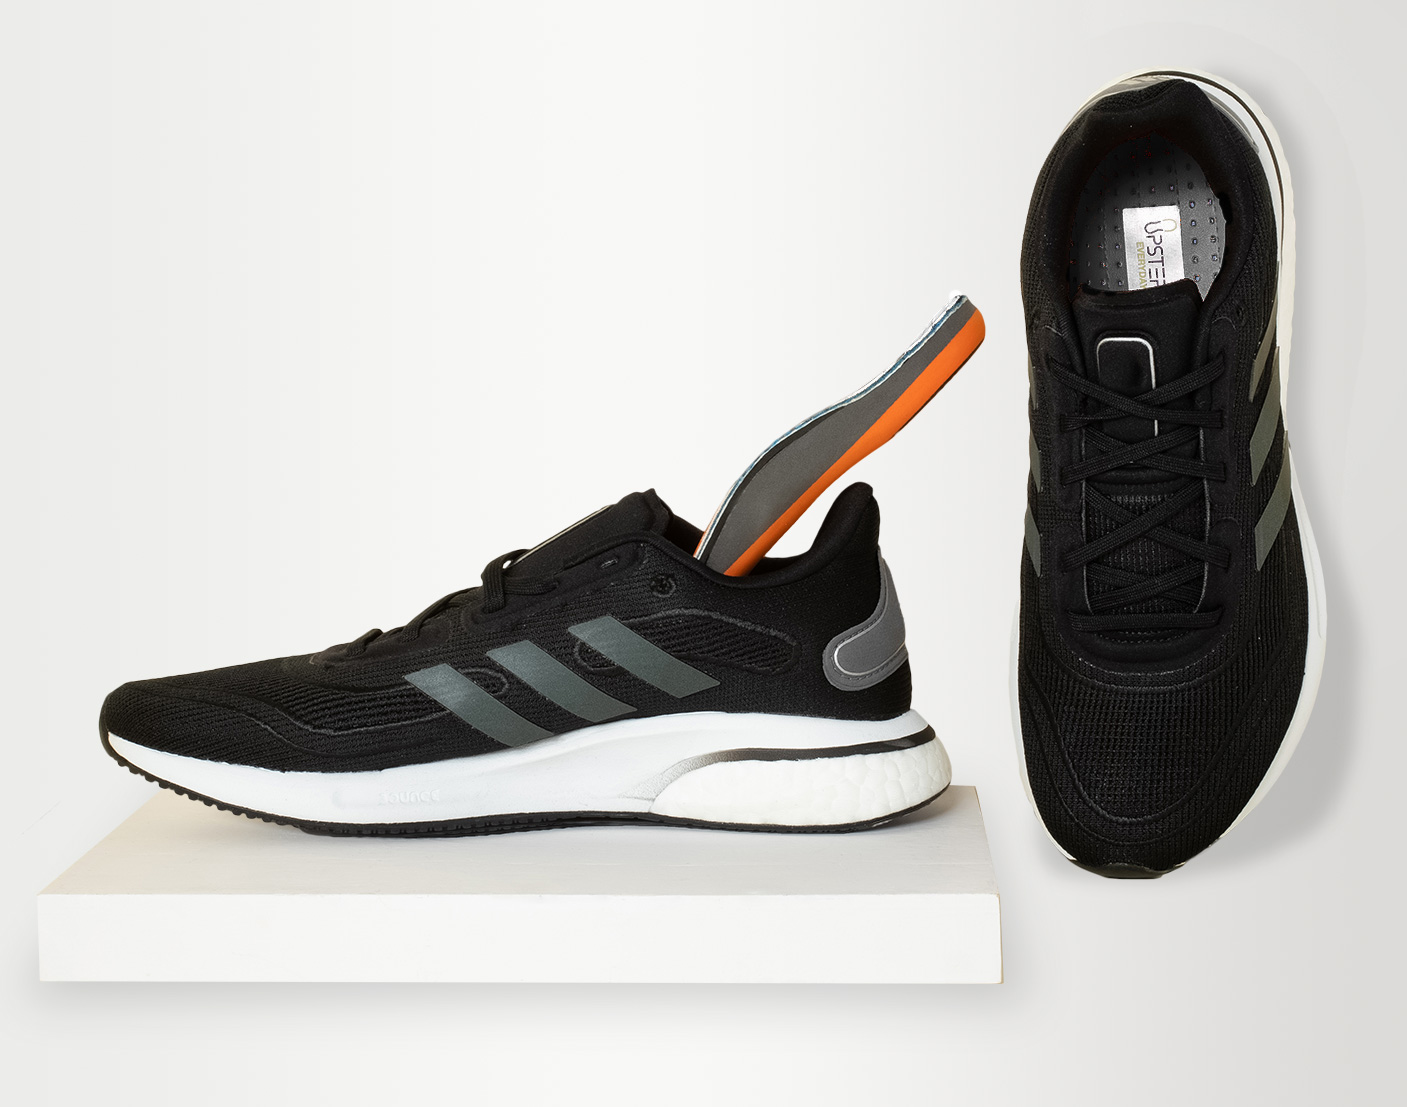 A pair of Adidas trainers with Supination Custom Orthotics made by Upstep placed inside of them.